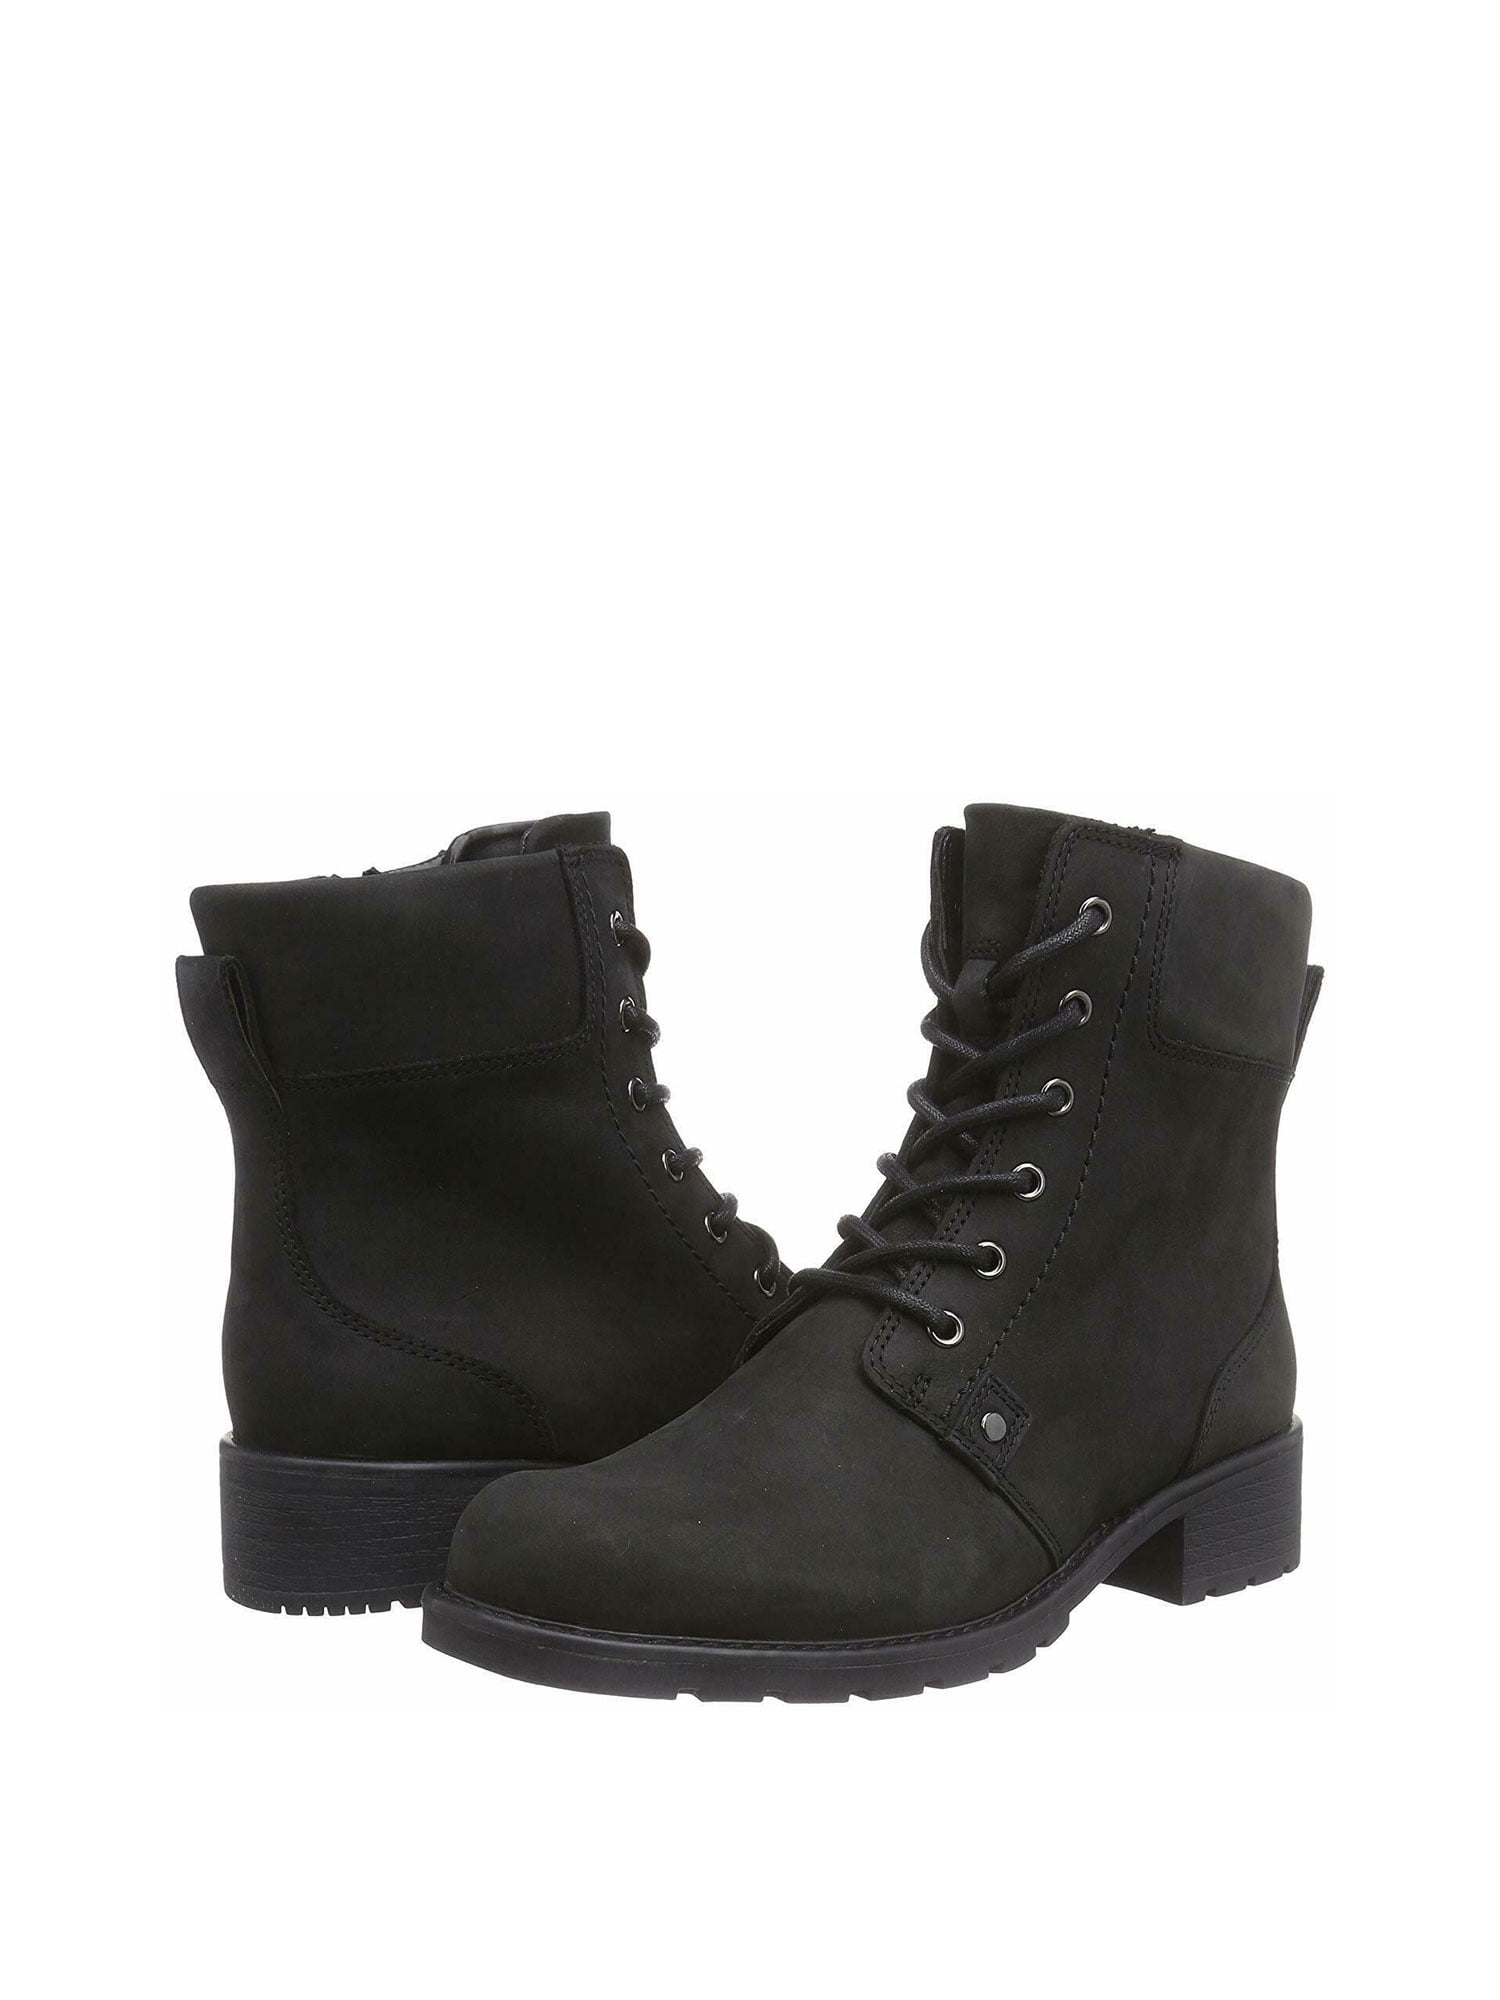 Lace Up Leather Combat Boots 10938 